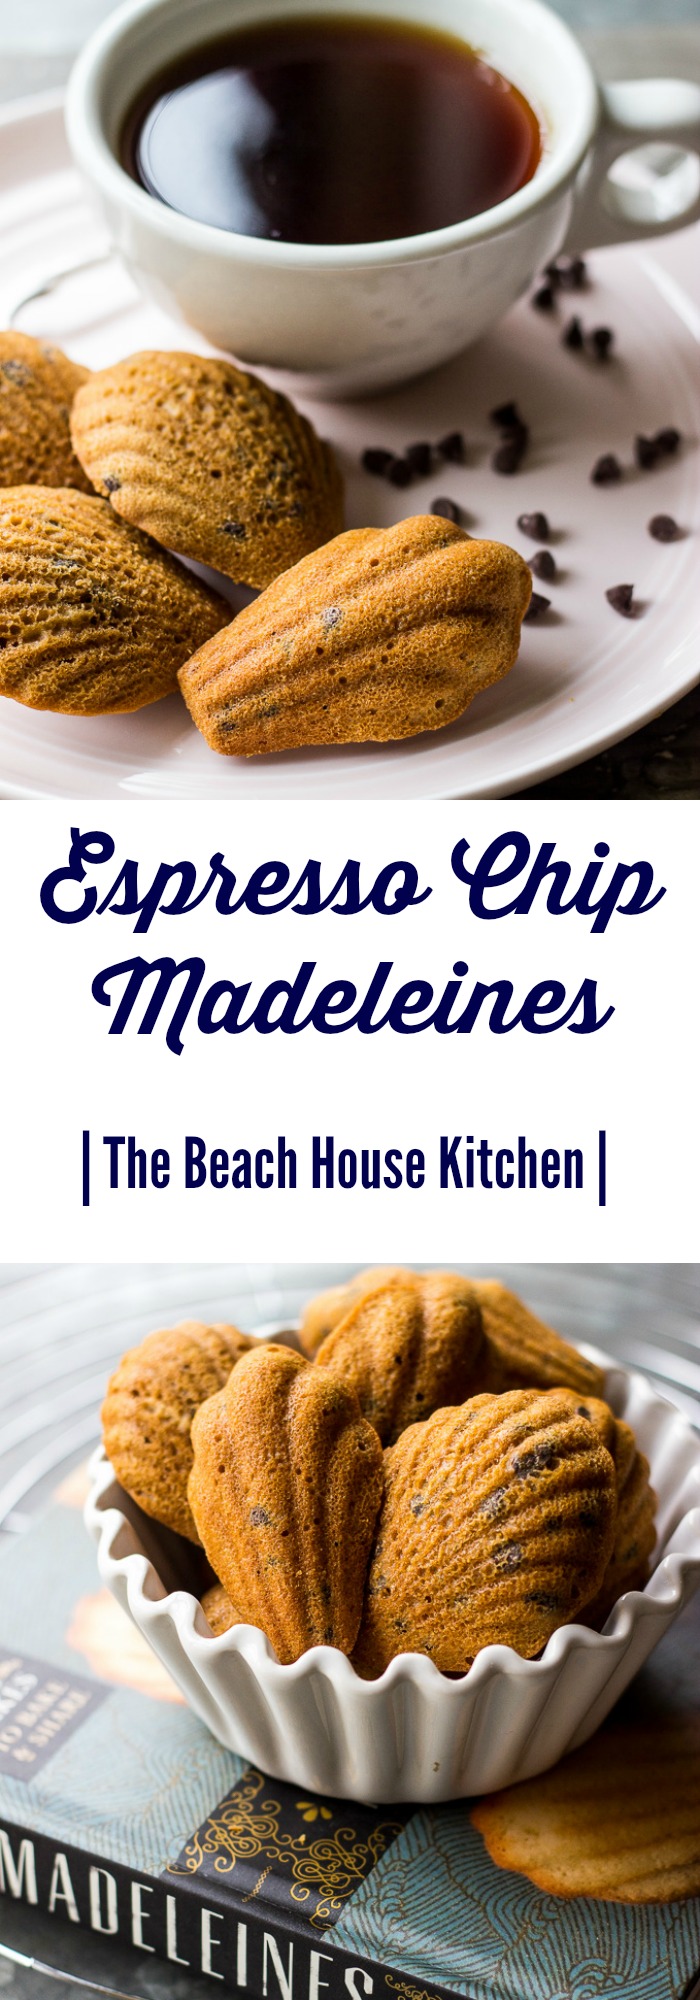 Espresso Chip Madeleines and a Giveaway